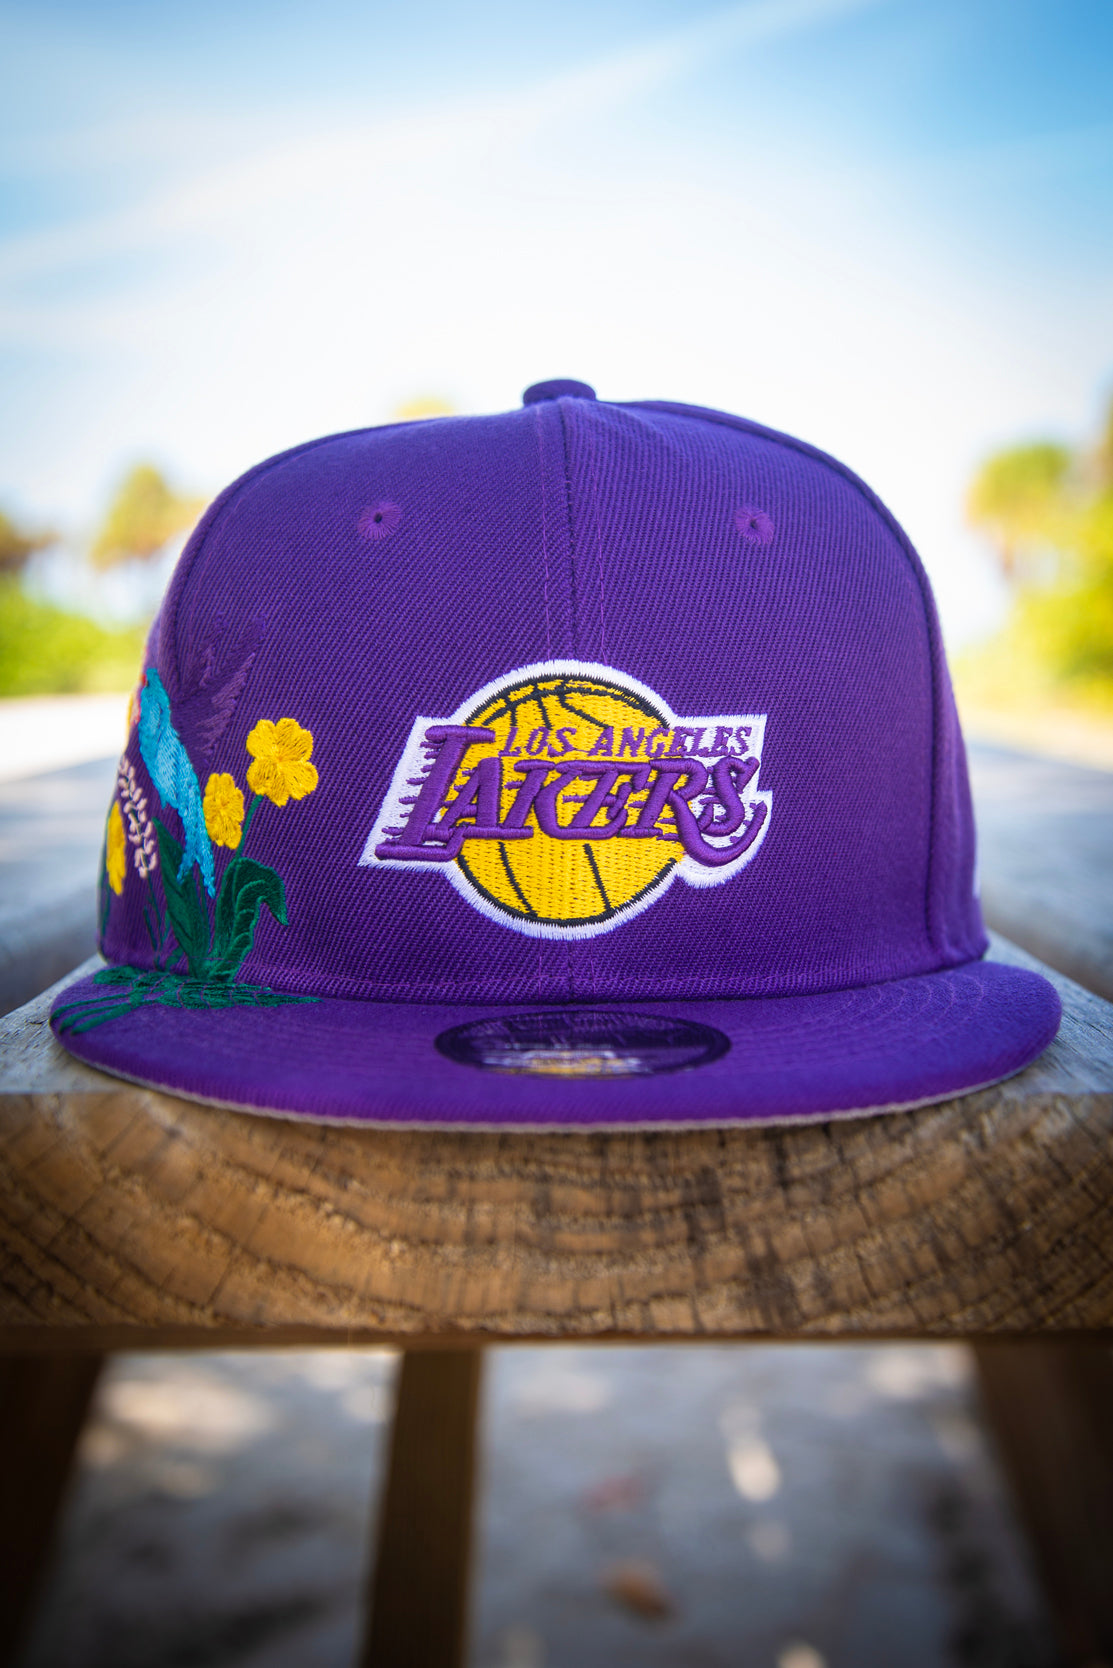 Buy the beanie Los Angeles Lakers by New Era